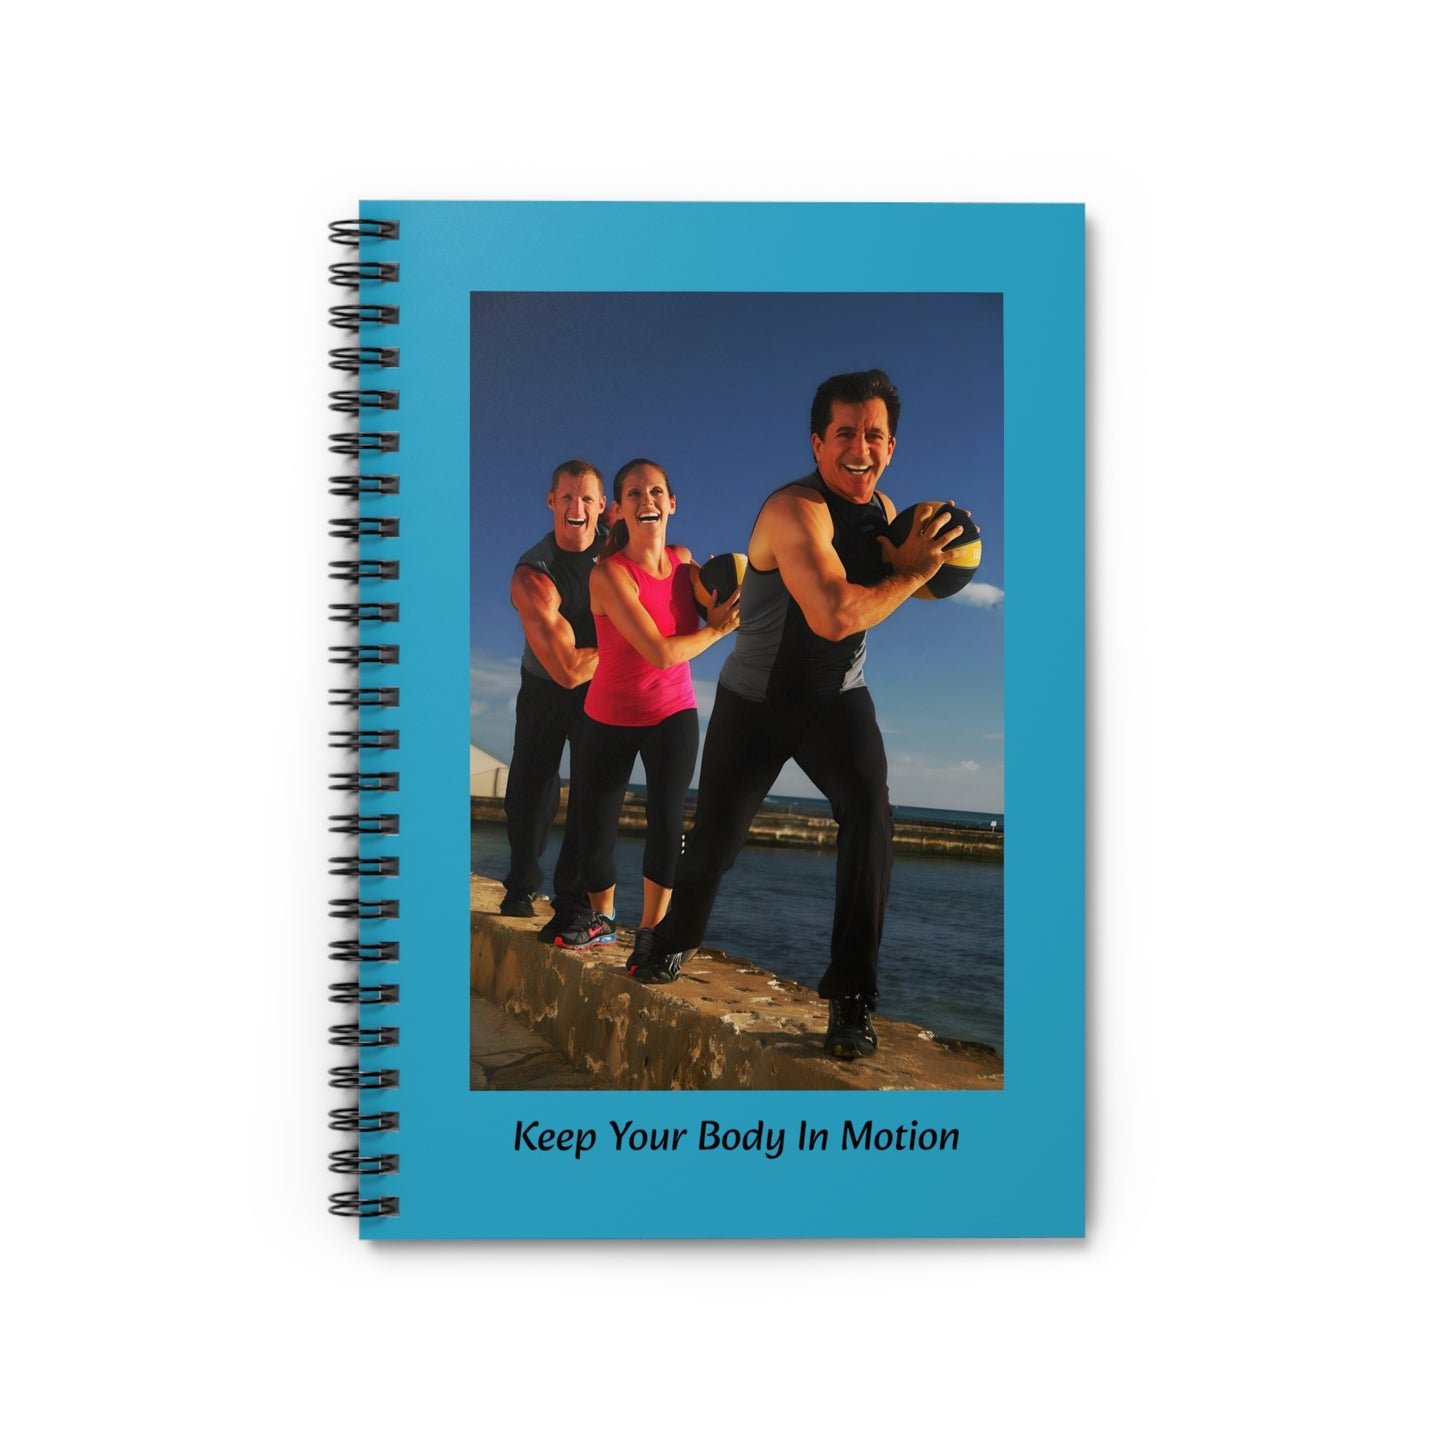 Bodies in Motion Fitness Journal Spiral Notebook - Ruled Line